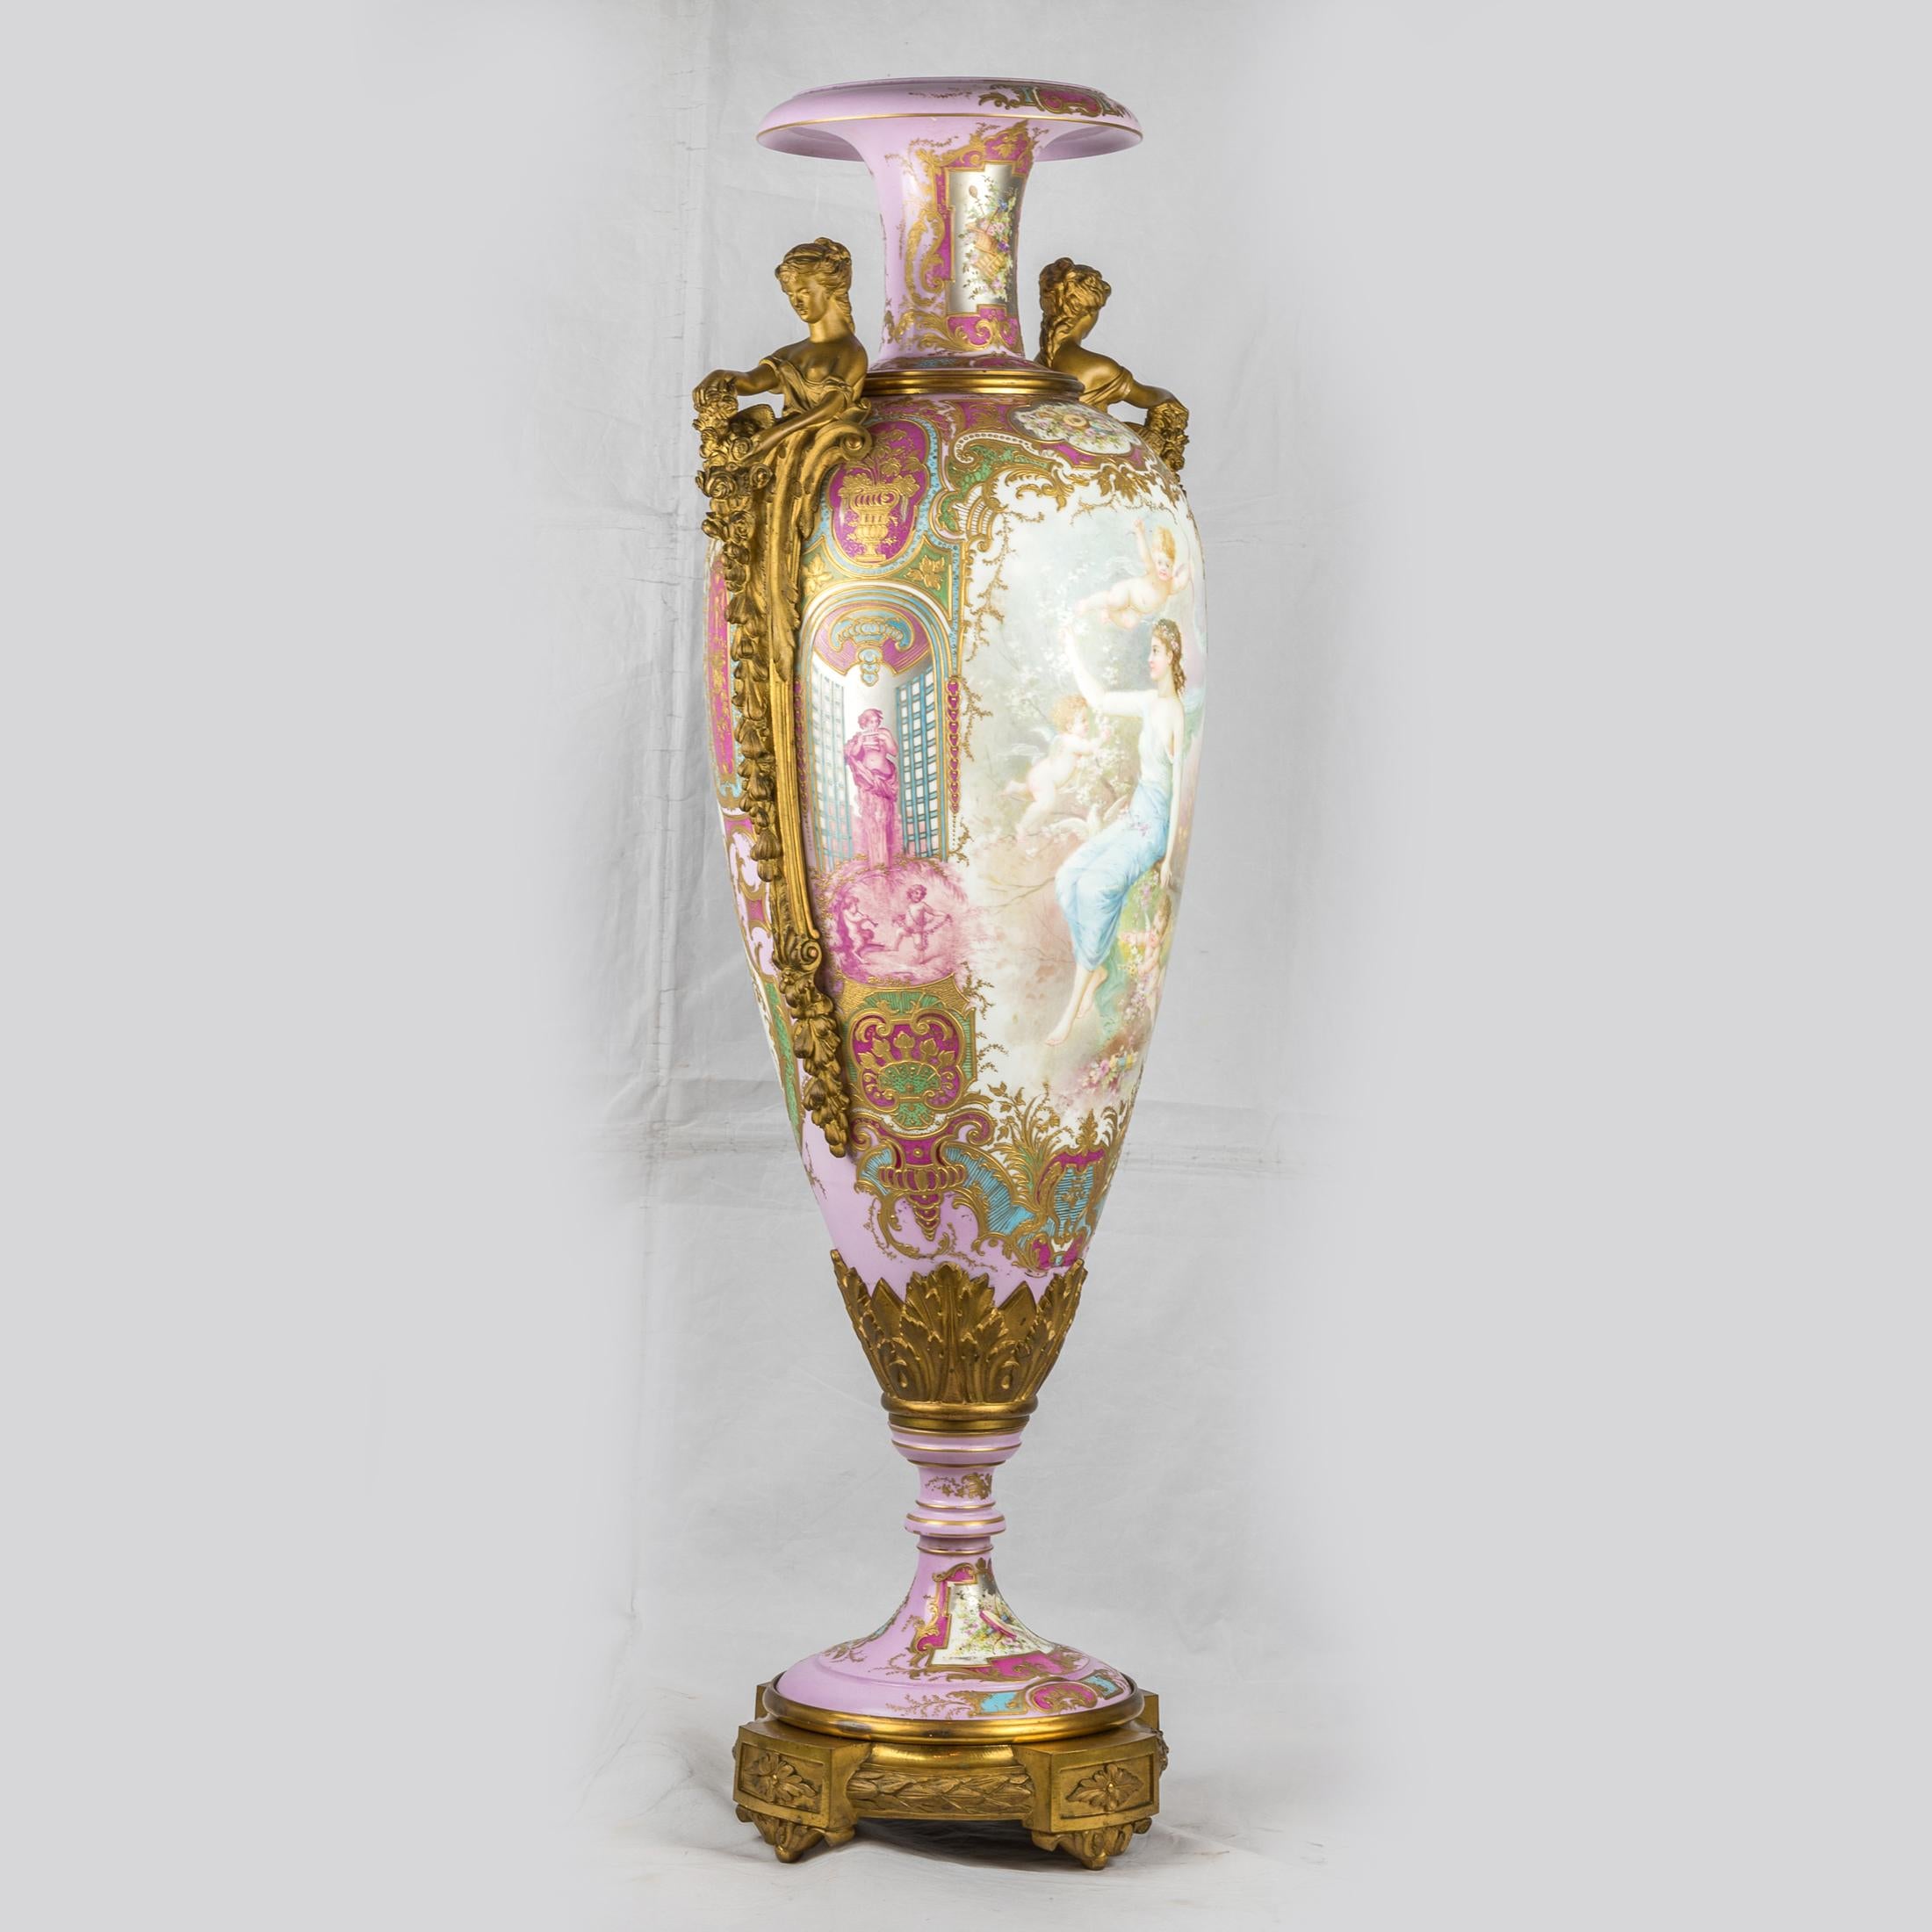 Very fine quality gilt bronze mounted Sèvres-style pink-ground vase with elongated shield shape, painted with a maiden and cupids with arrows in the garden, within a pale-blue and gilt scrollwork surround, the reverse with a landscape, streams and